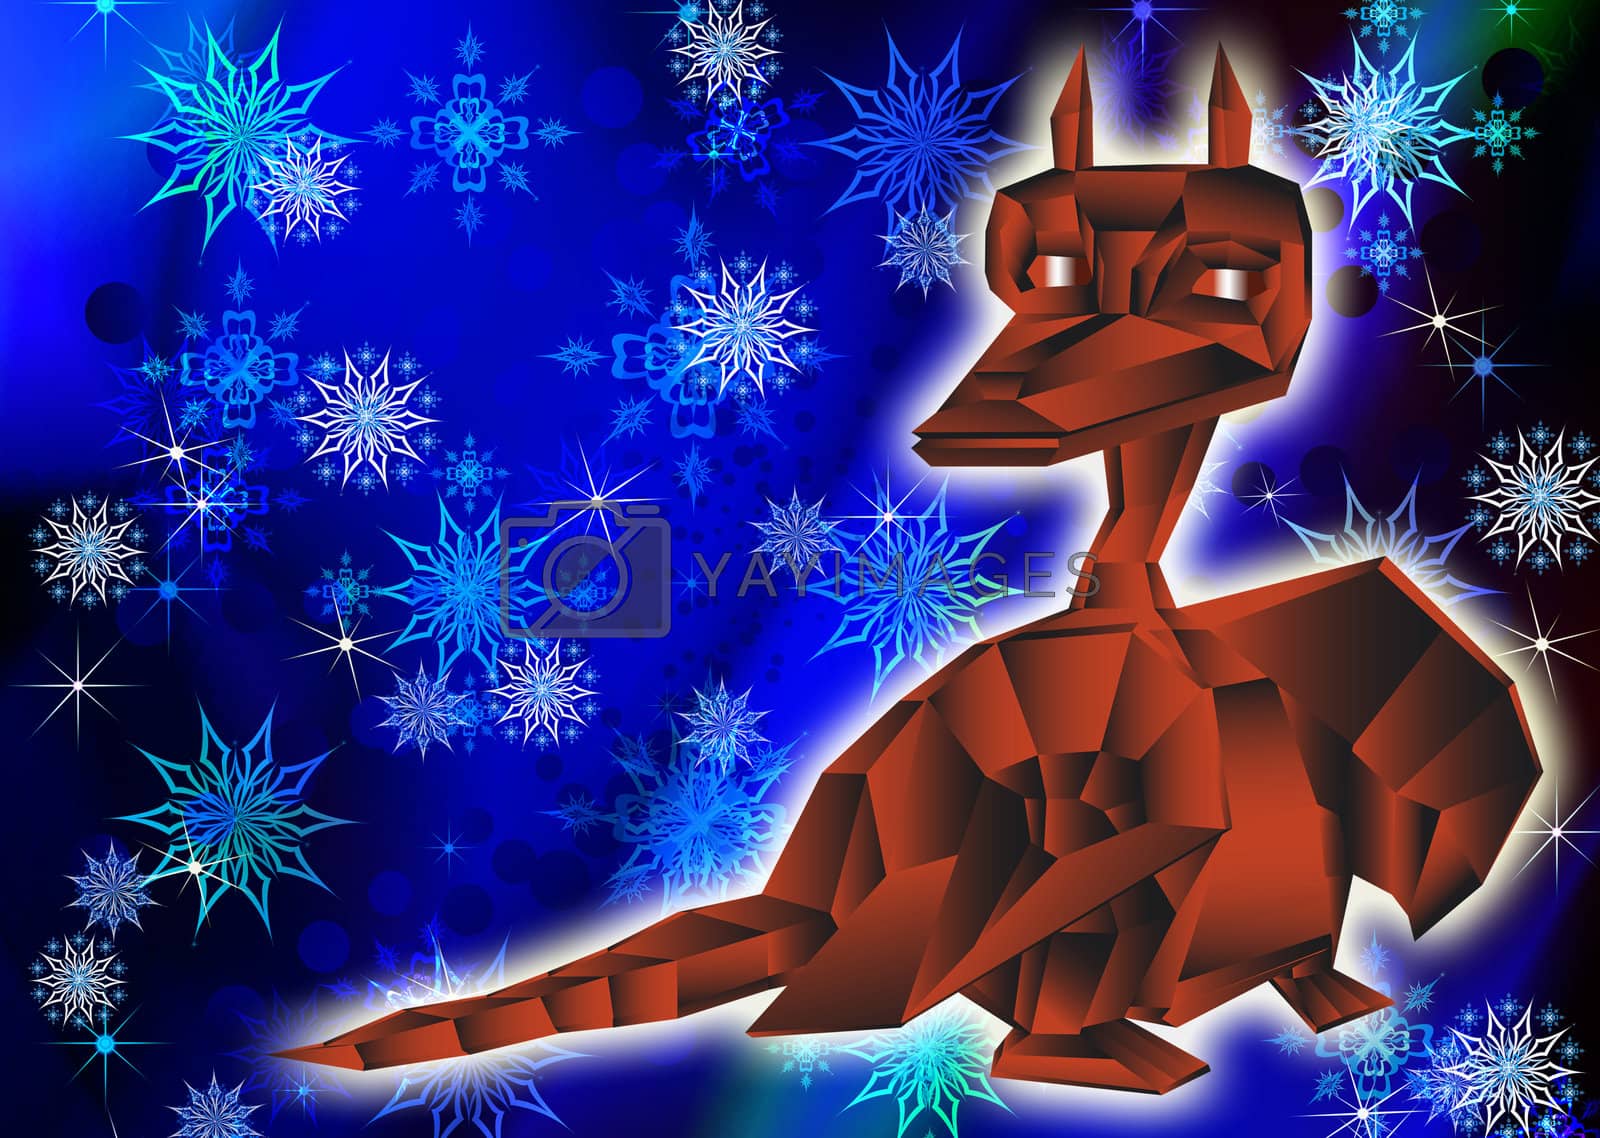 Royalty free image of Fantastic dragon-symbol 2012 New Years by sergey150770SV